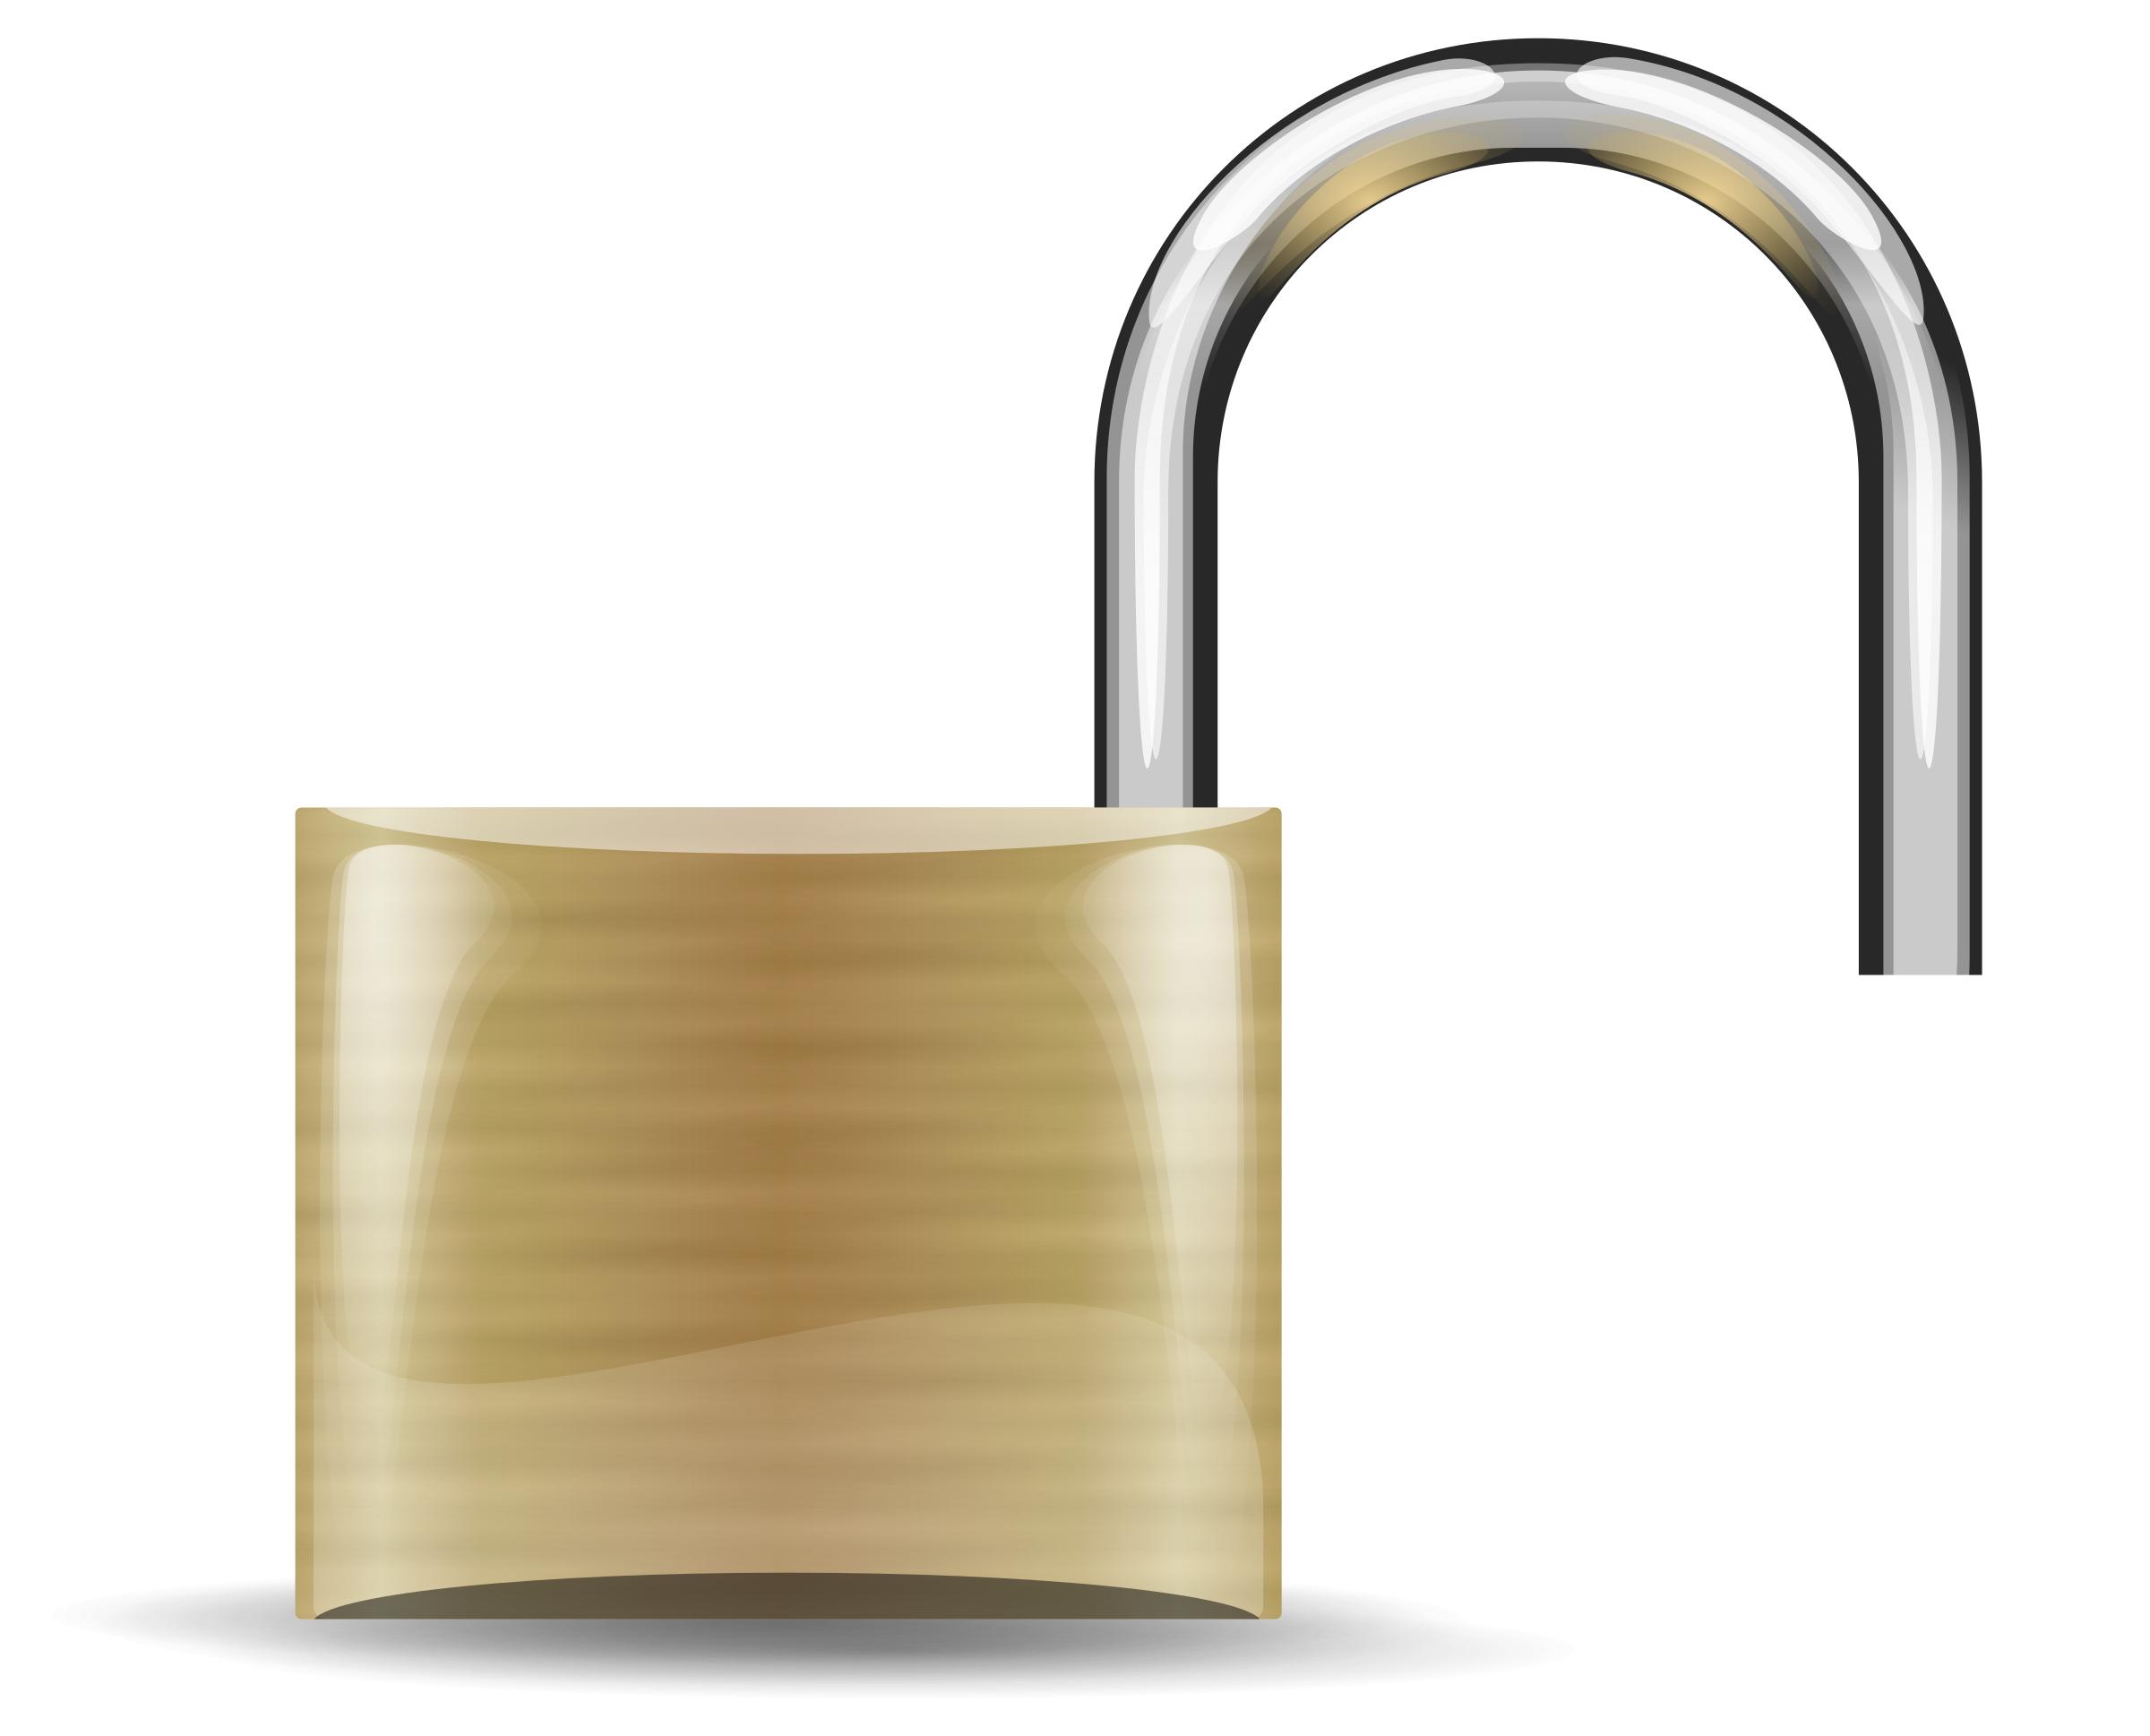 Opened lock png